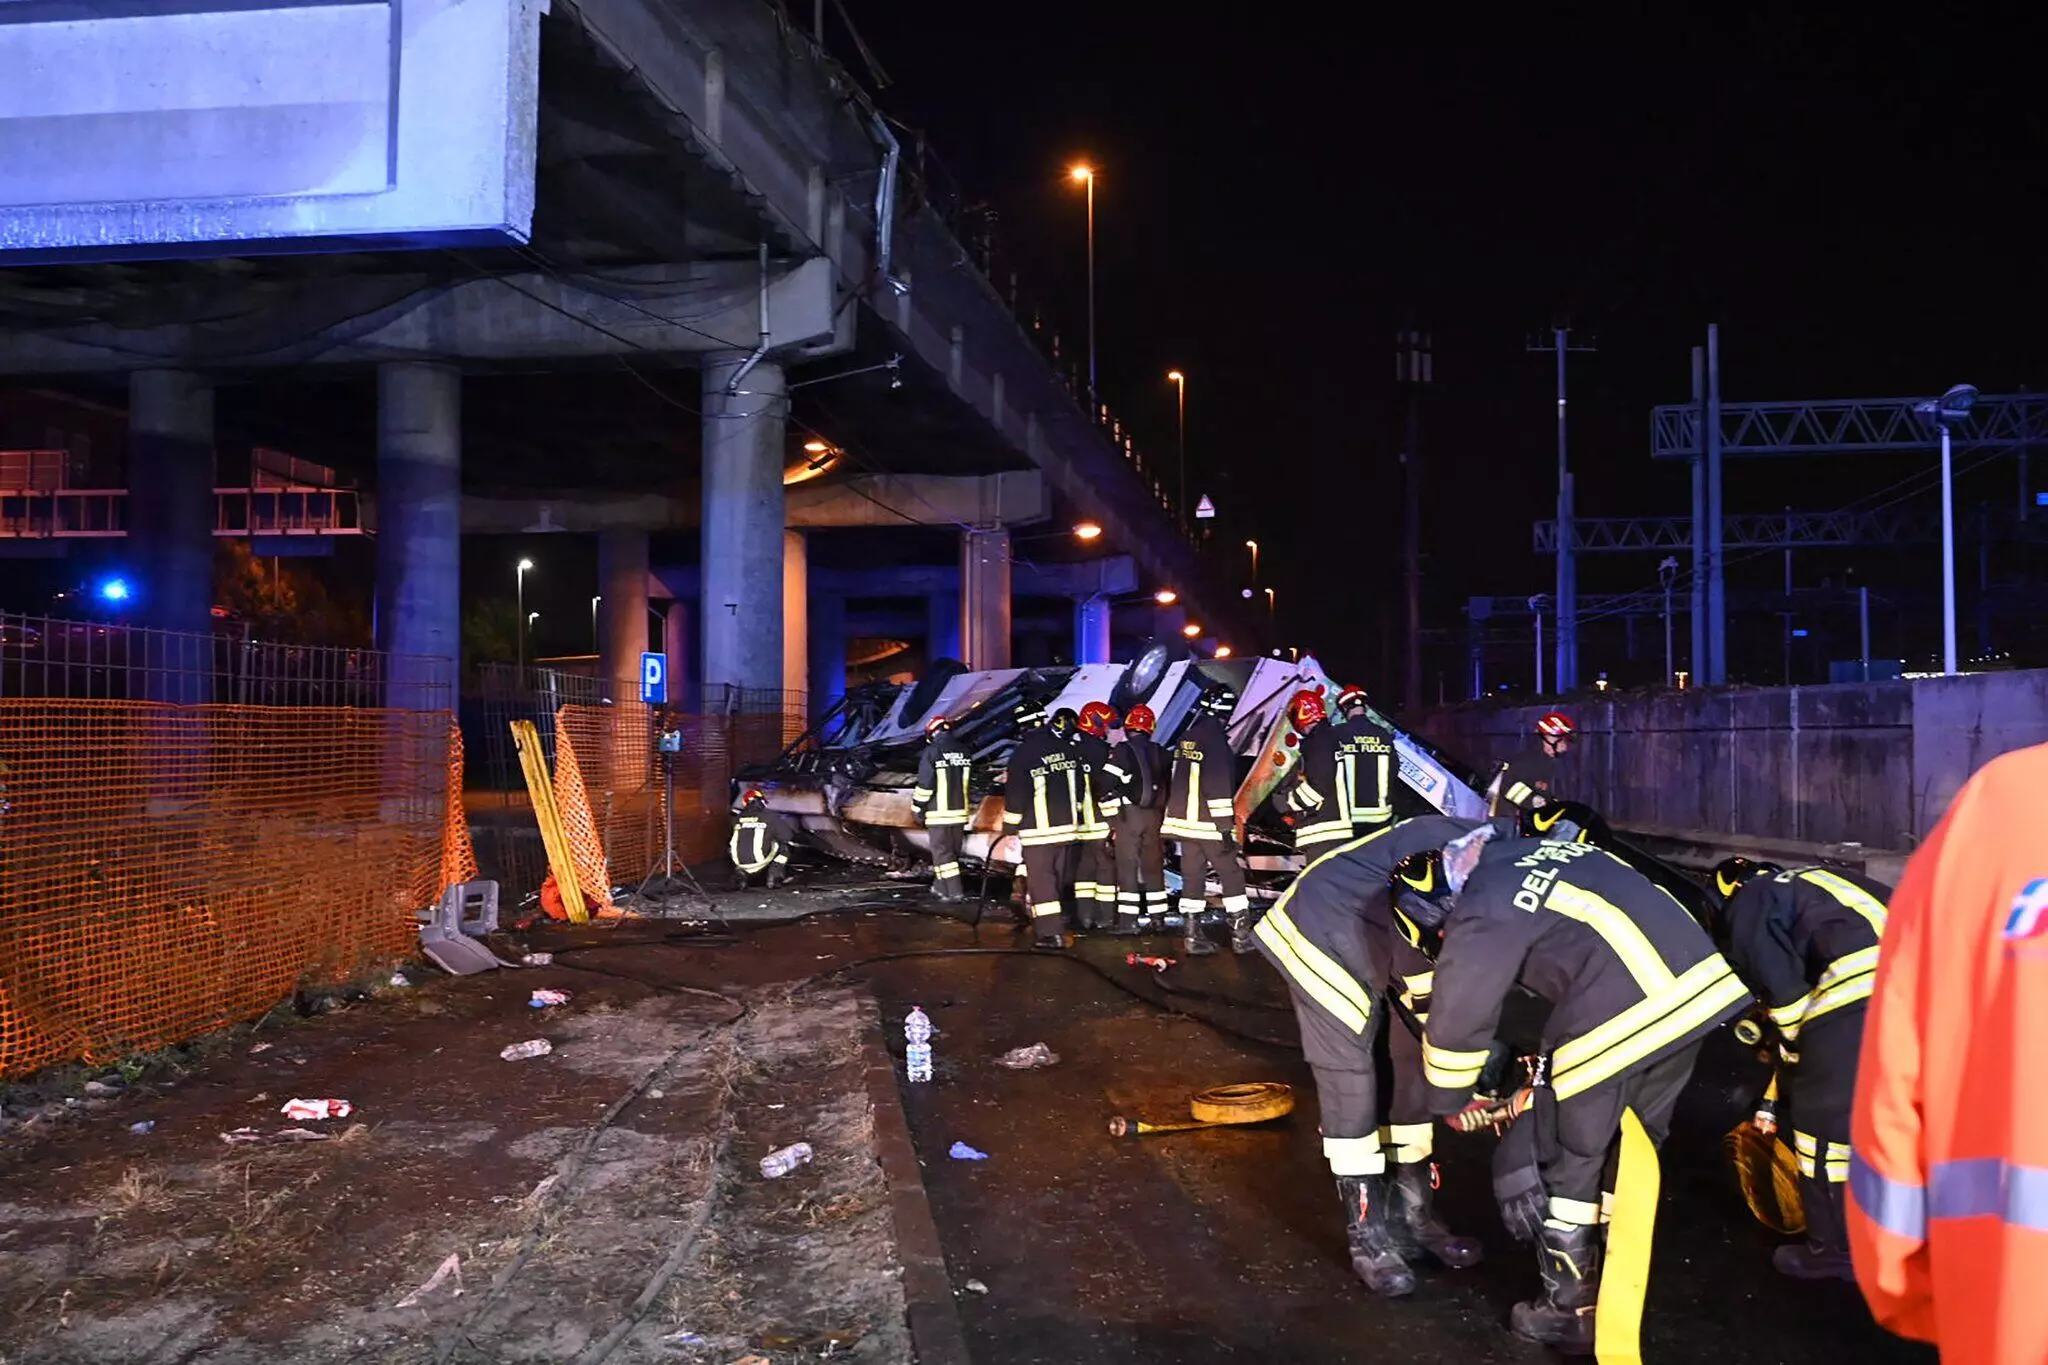 21 tourists killed, many injured as bus goes through overpass guardrail in Venice